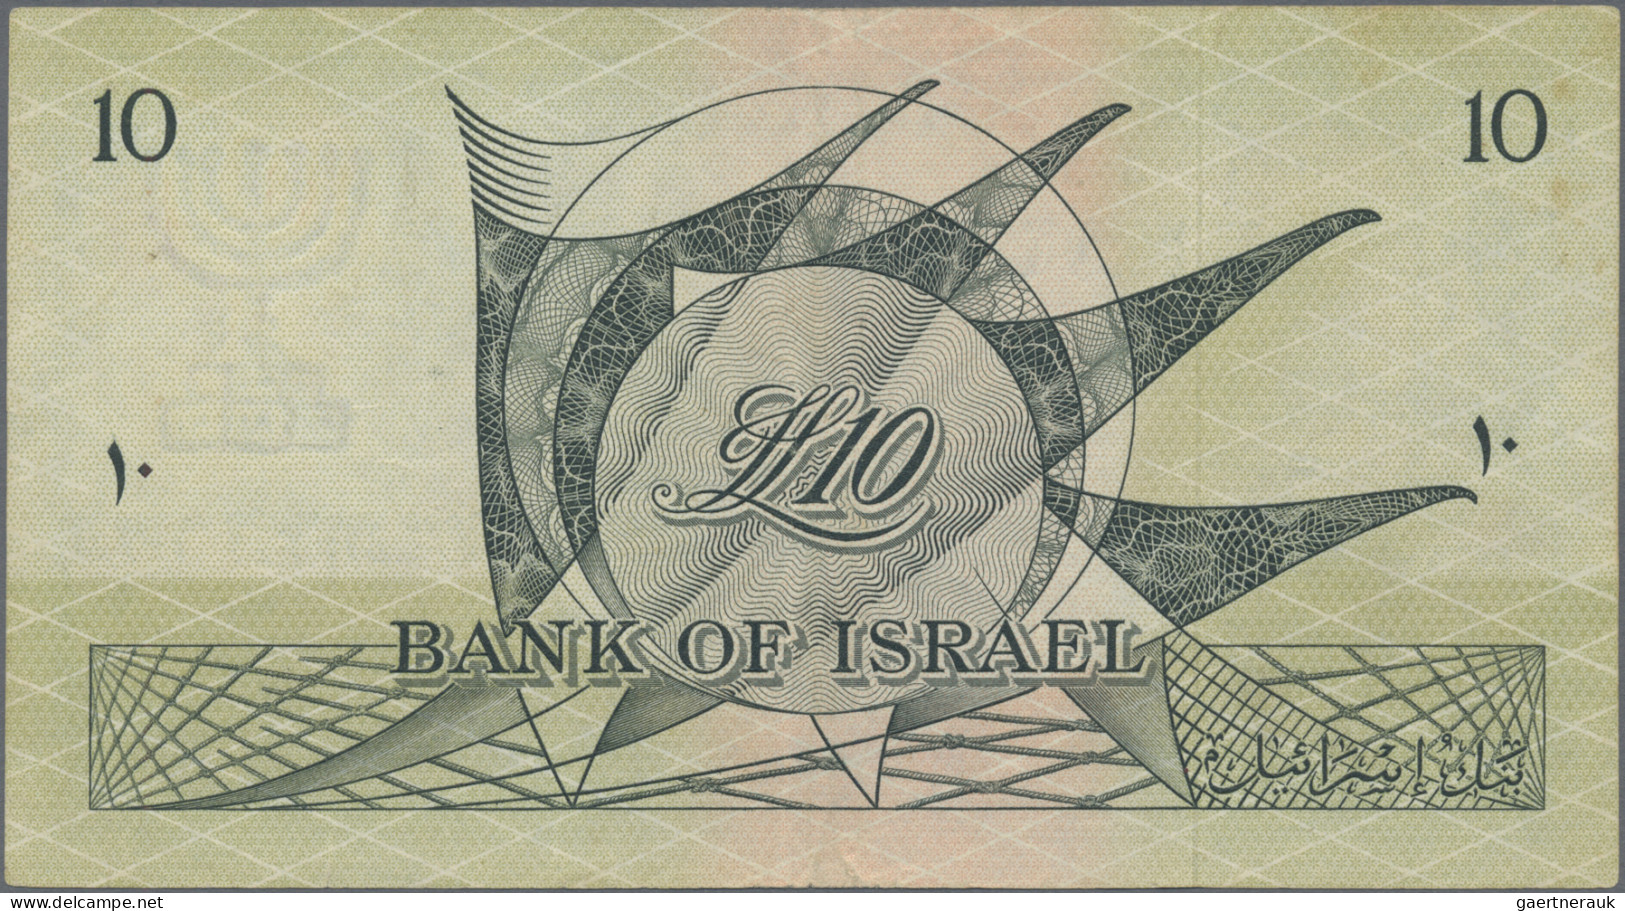 Israel: Bank of Israel, set with 4 banknotes, 1955 series, with 500 Pruta (P.24a